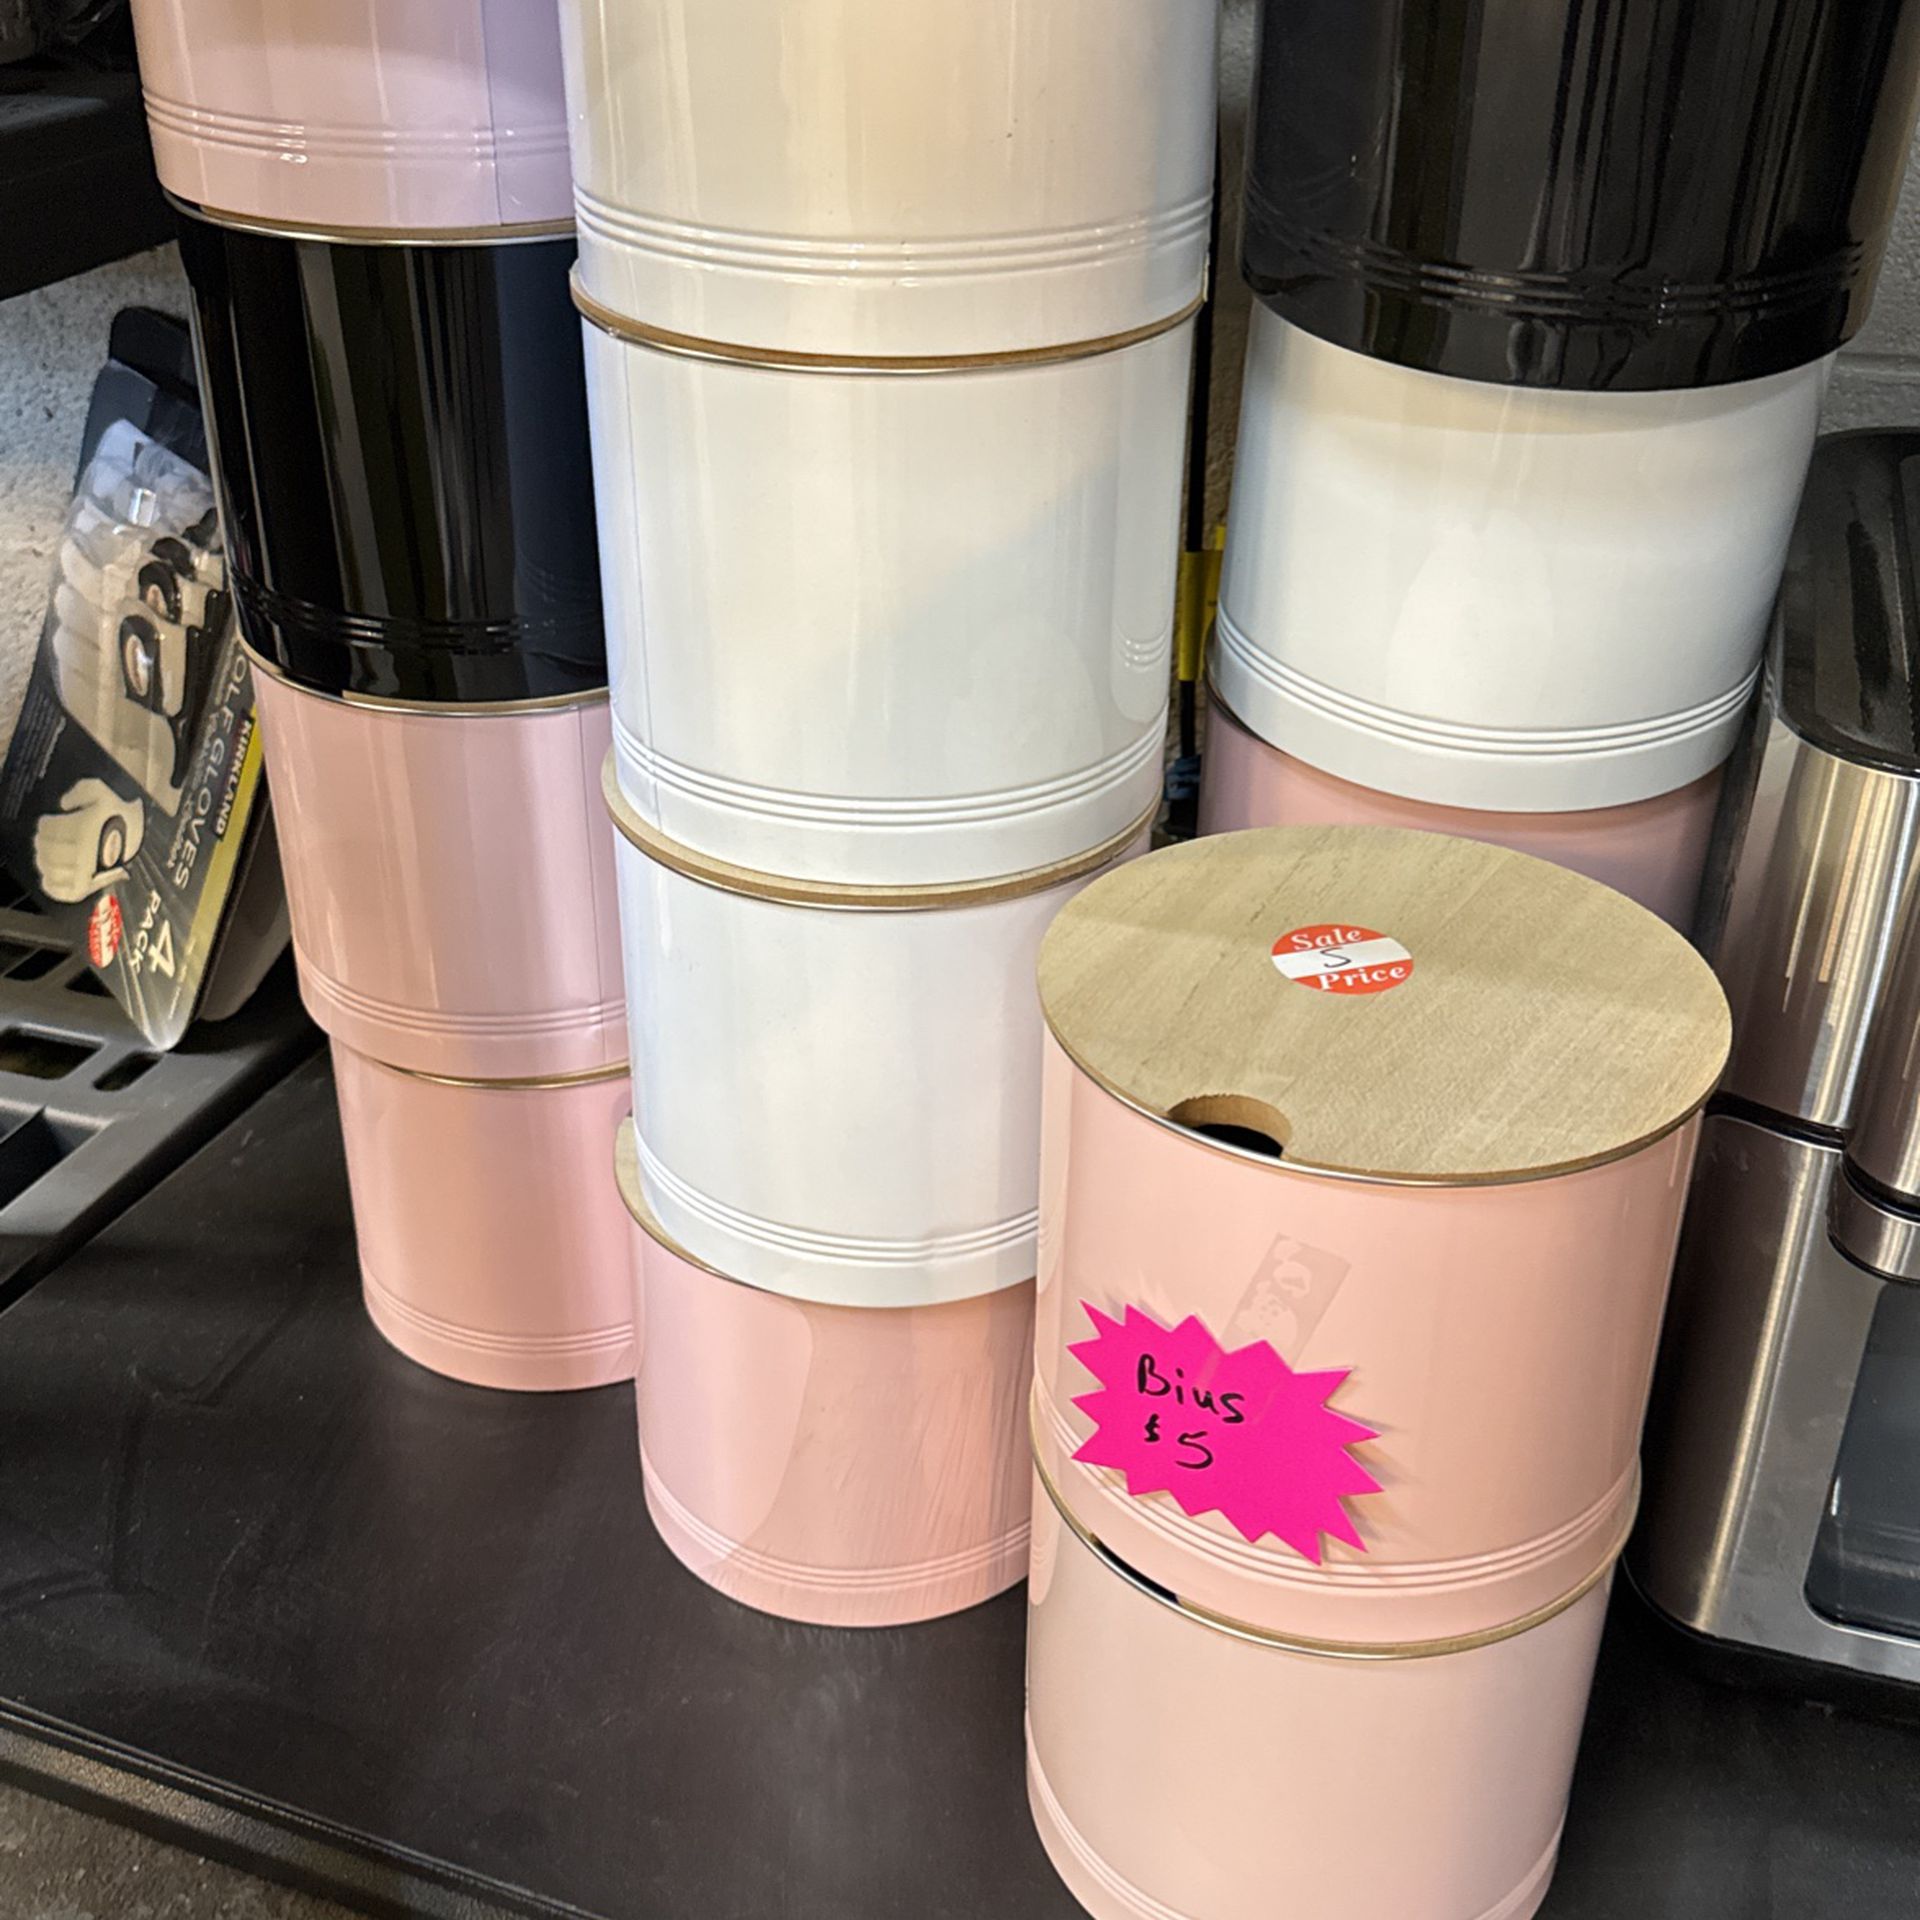 Bins , Cans New White Pink Or Black $5 Each 